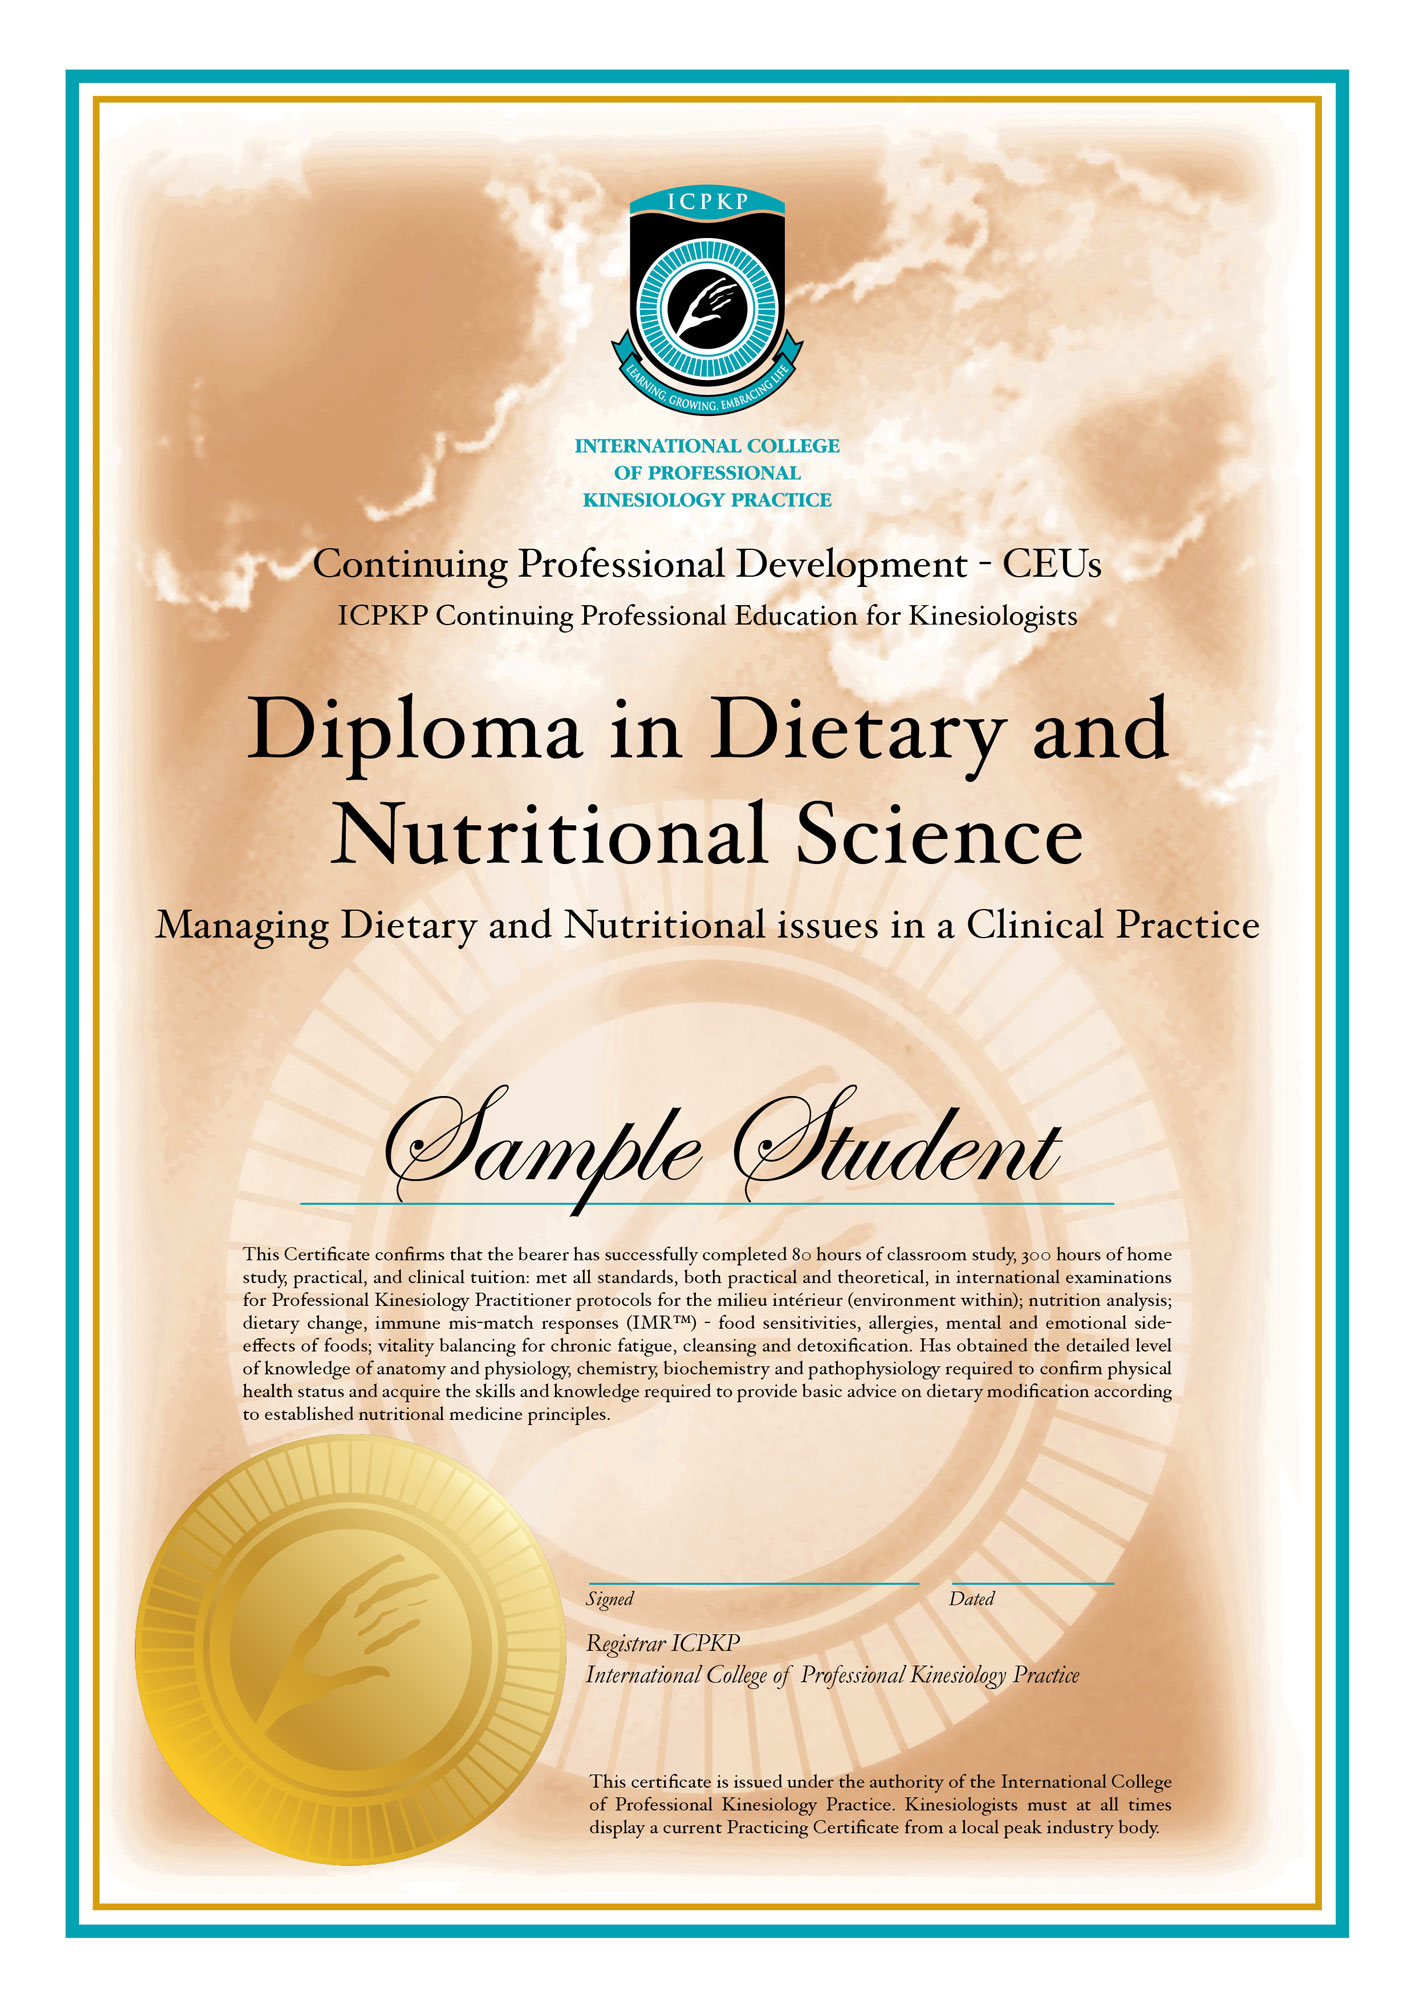 Diploma of Dietary and Nutritional Science certificate